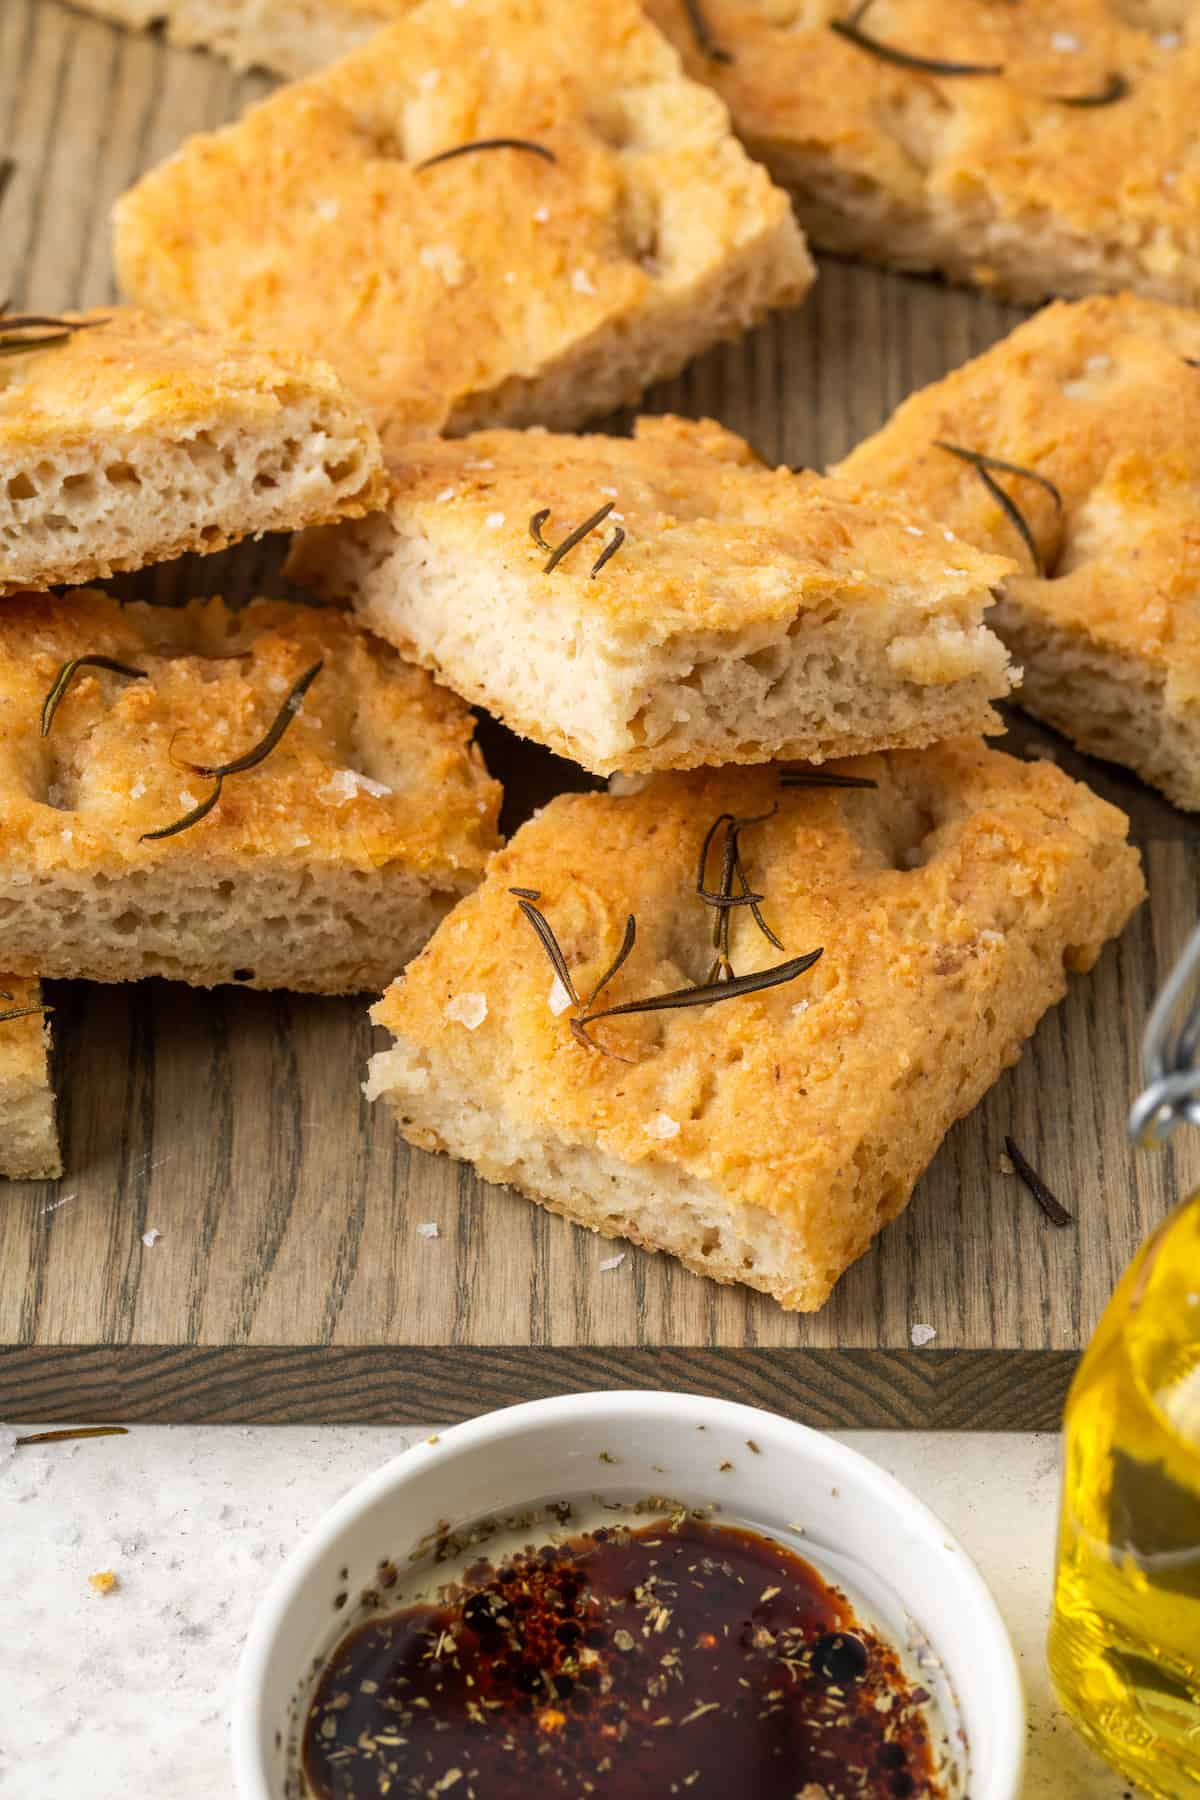 Pieces of gluten free focaccia is shown on a cutting board.